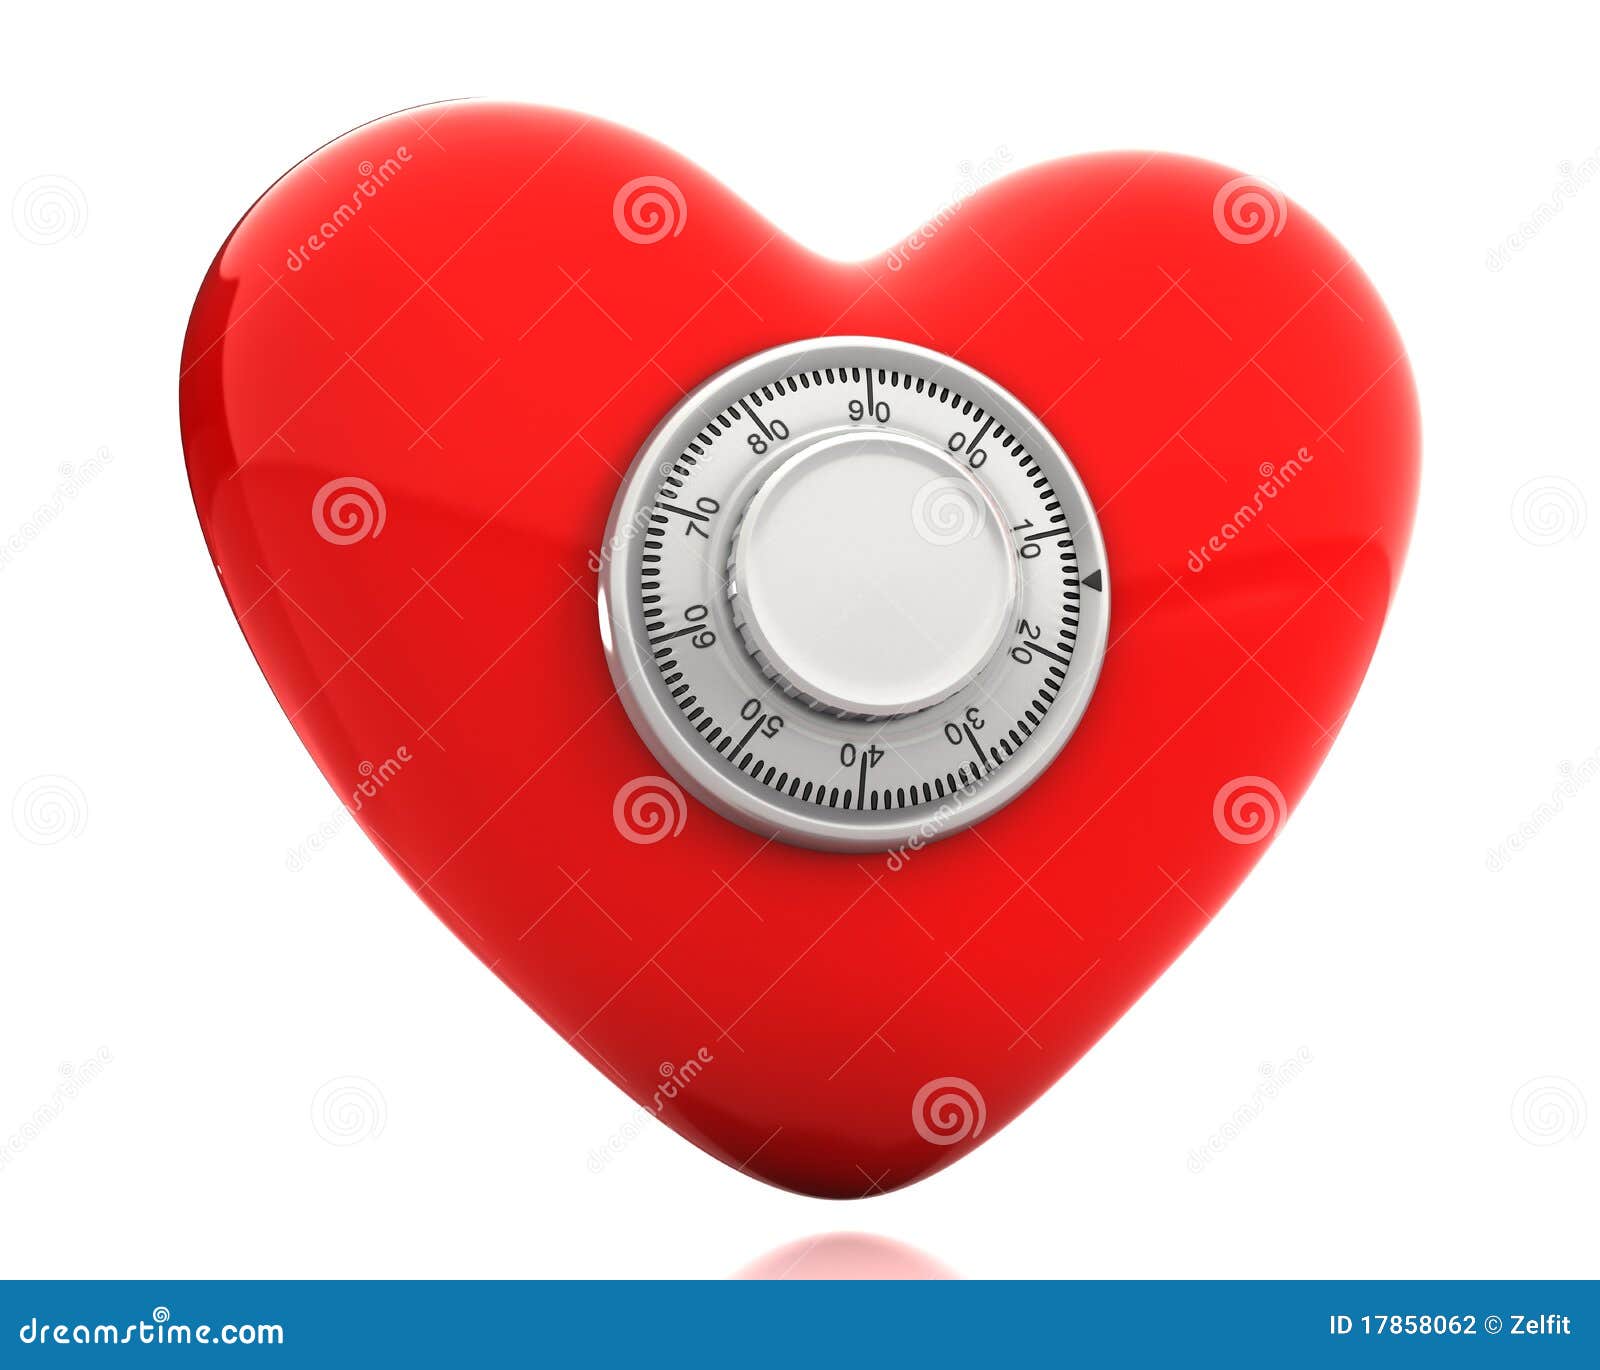 red heart with a numeric safe lock